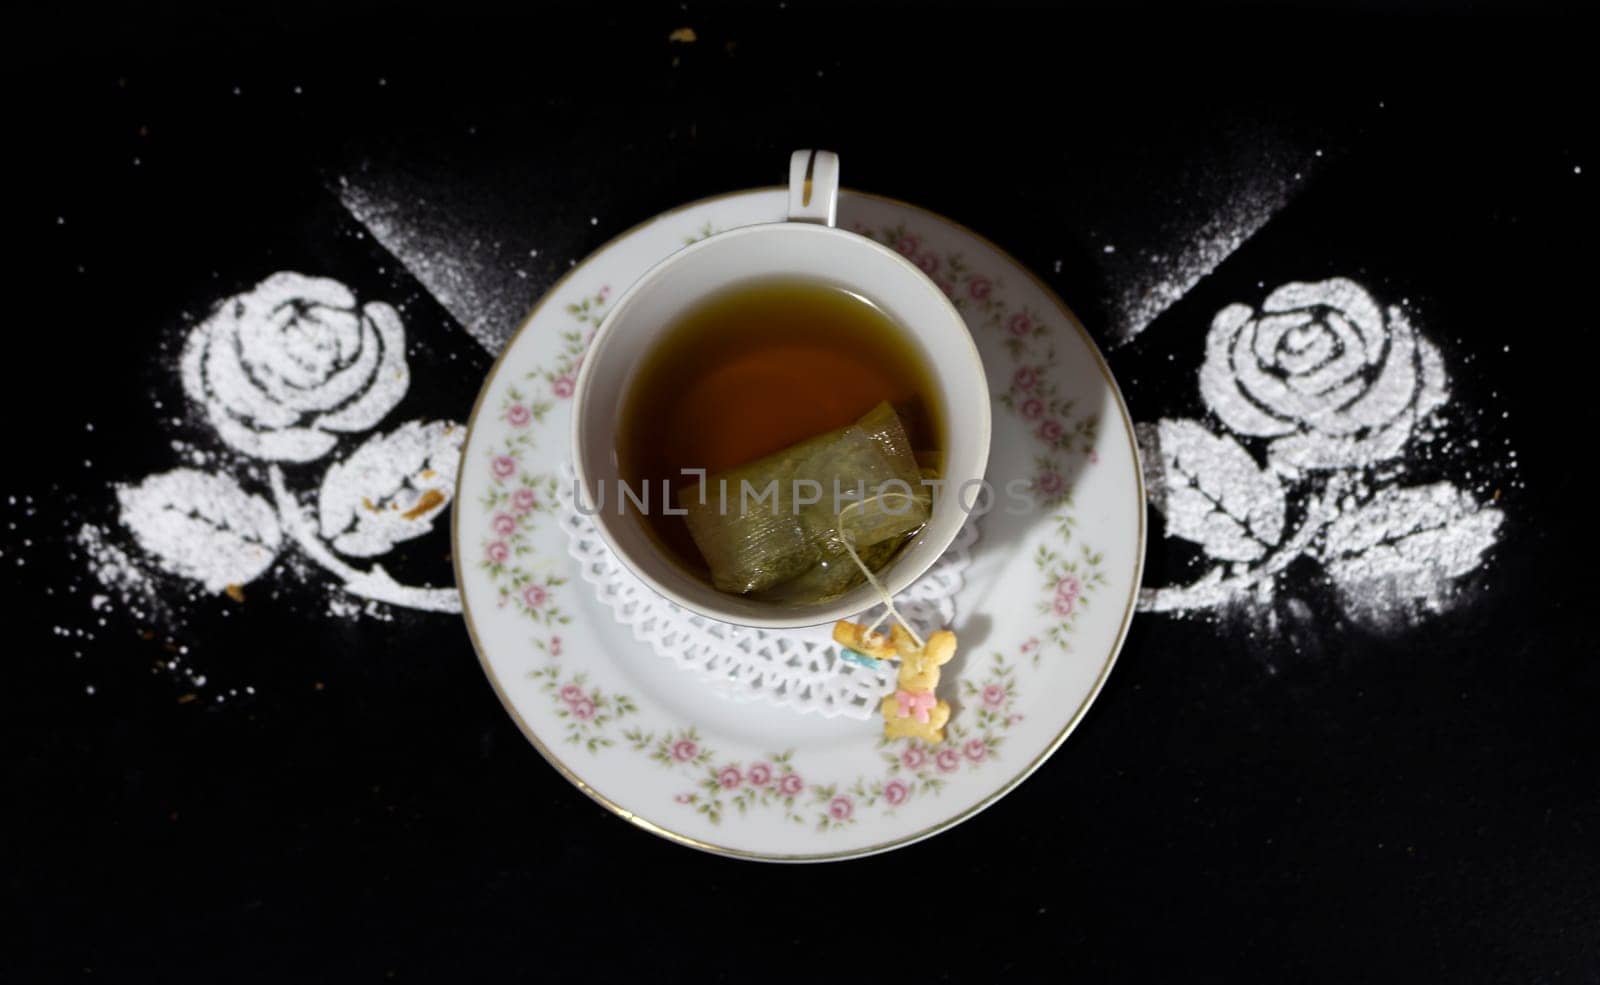 Antique porcelain tea cup seen from above with flowers, the tea bag inside and a small doll of candy growing, decorated with two powdered sugar flowers. High quality photo